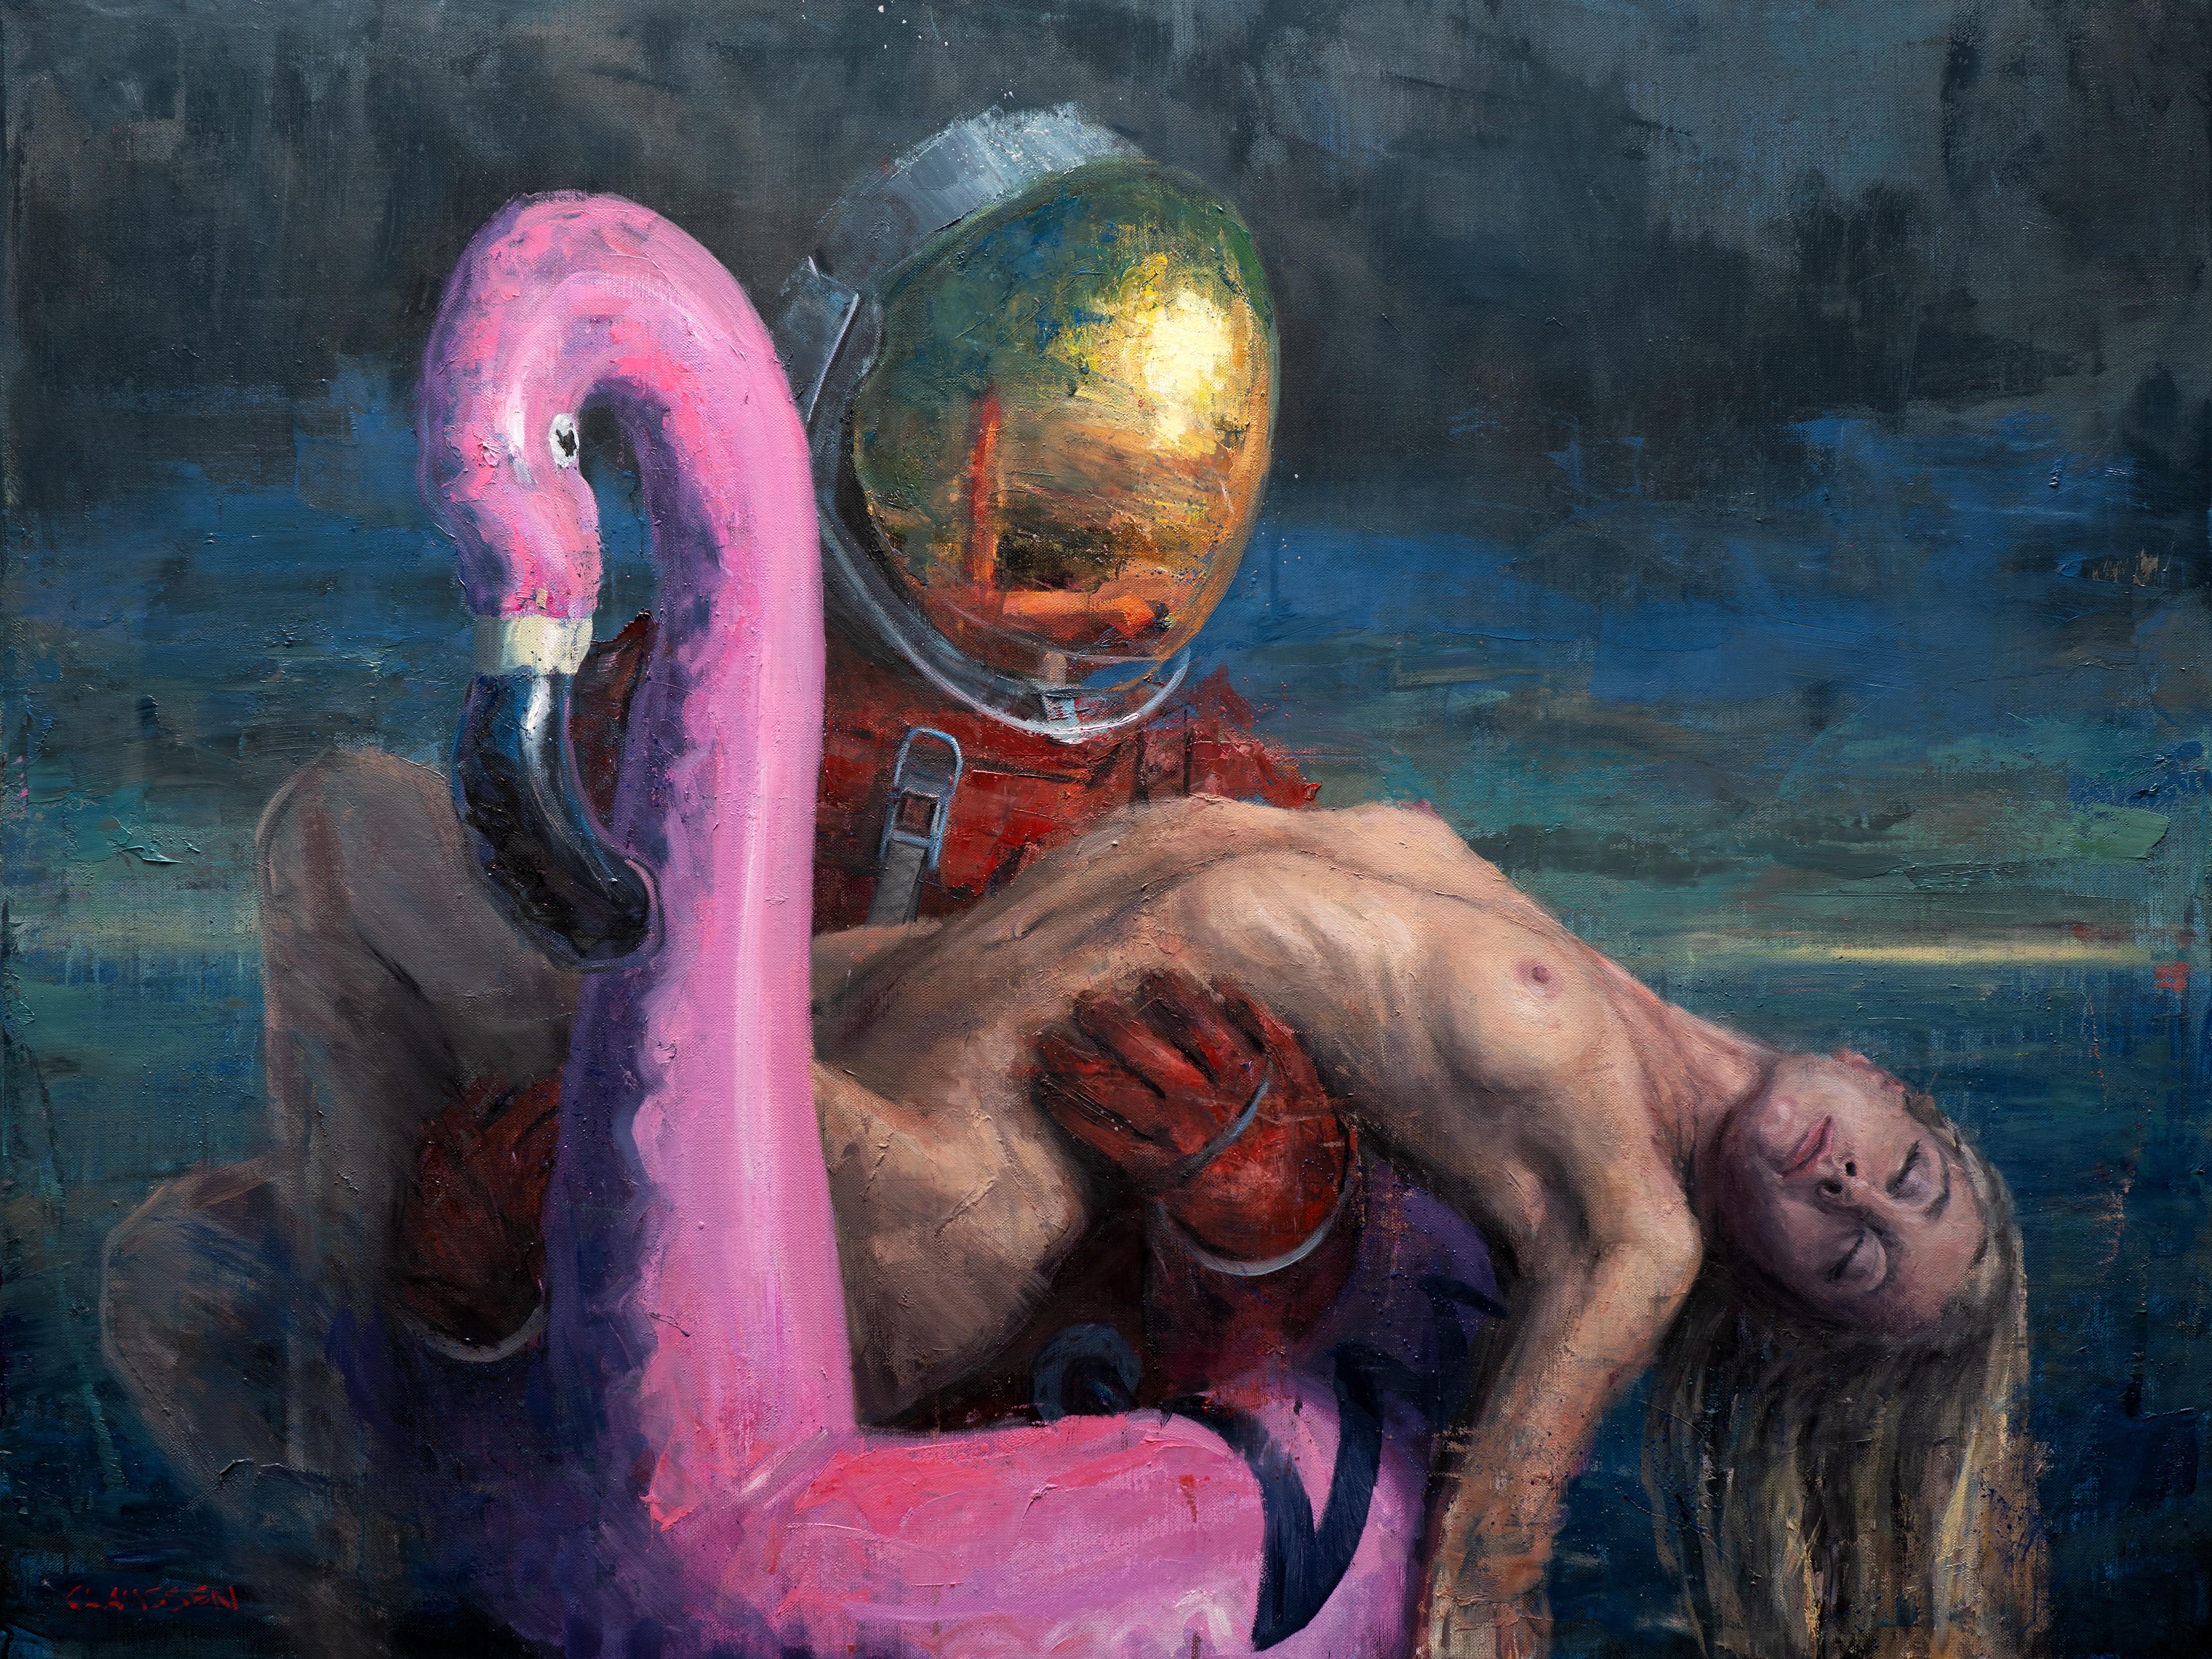 "You Are Not Alone Anymore" - Oil Painting Featuring an Astronaut & Nude Figure